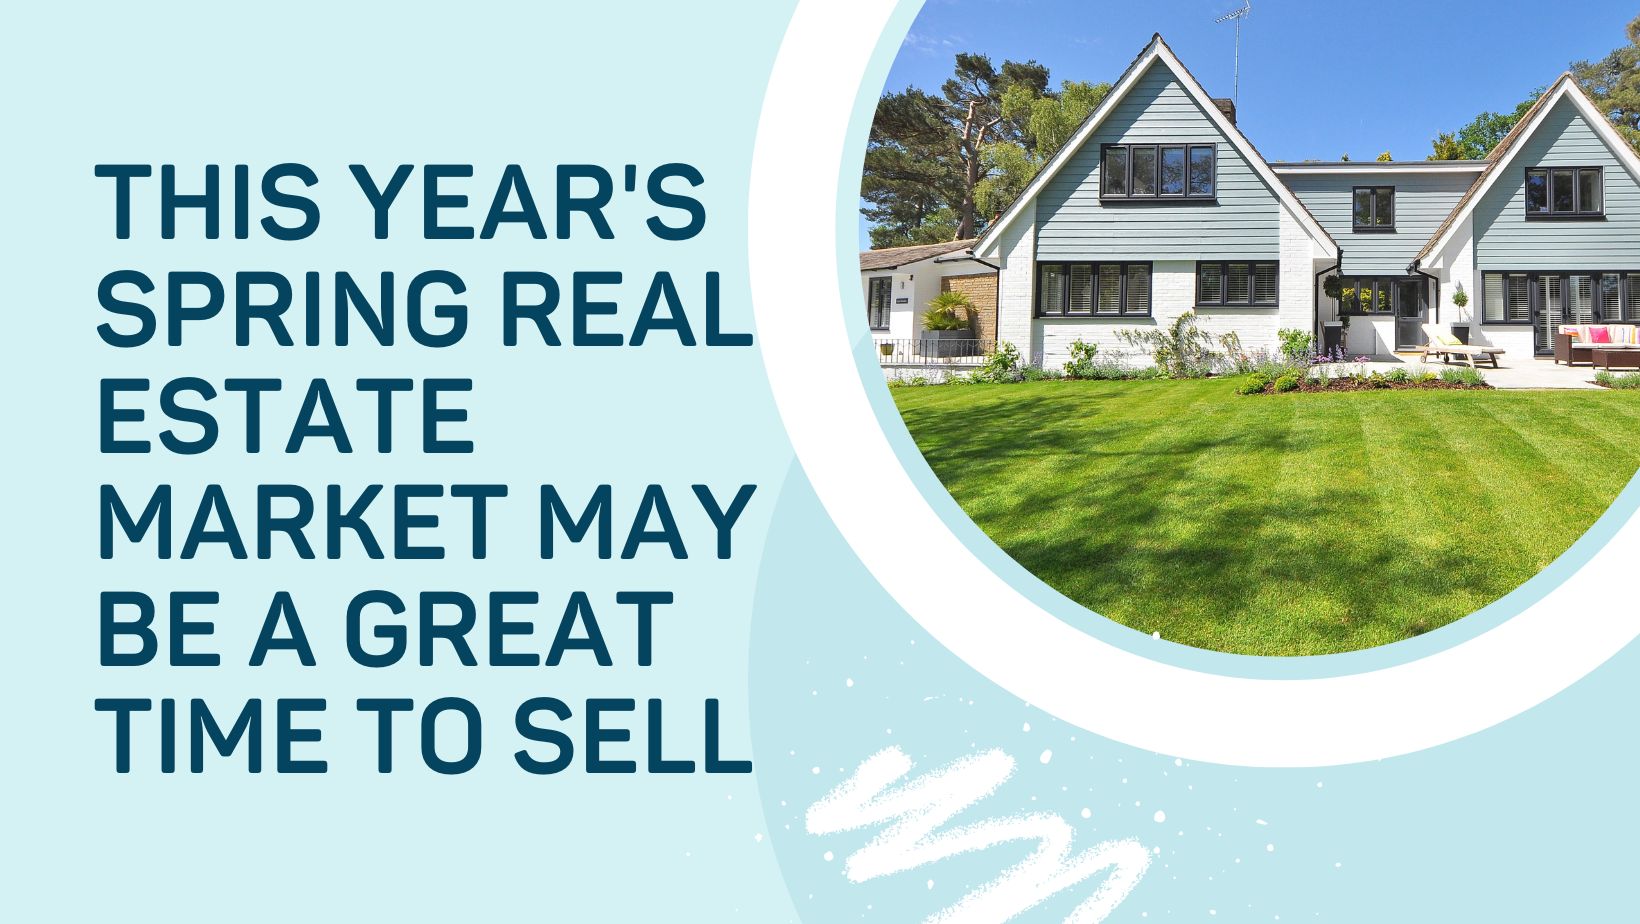 This Year's Spring Real Estate Market May Be a Great Time to Sell